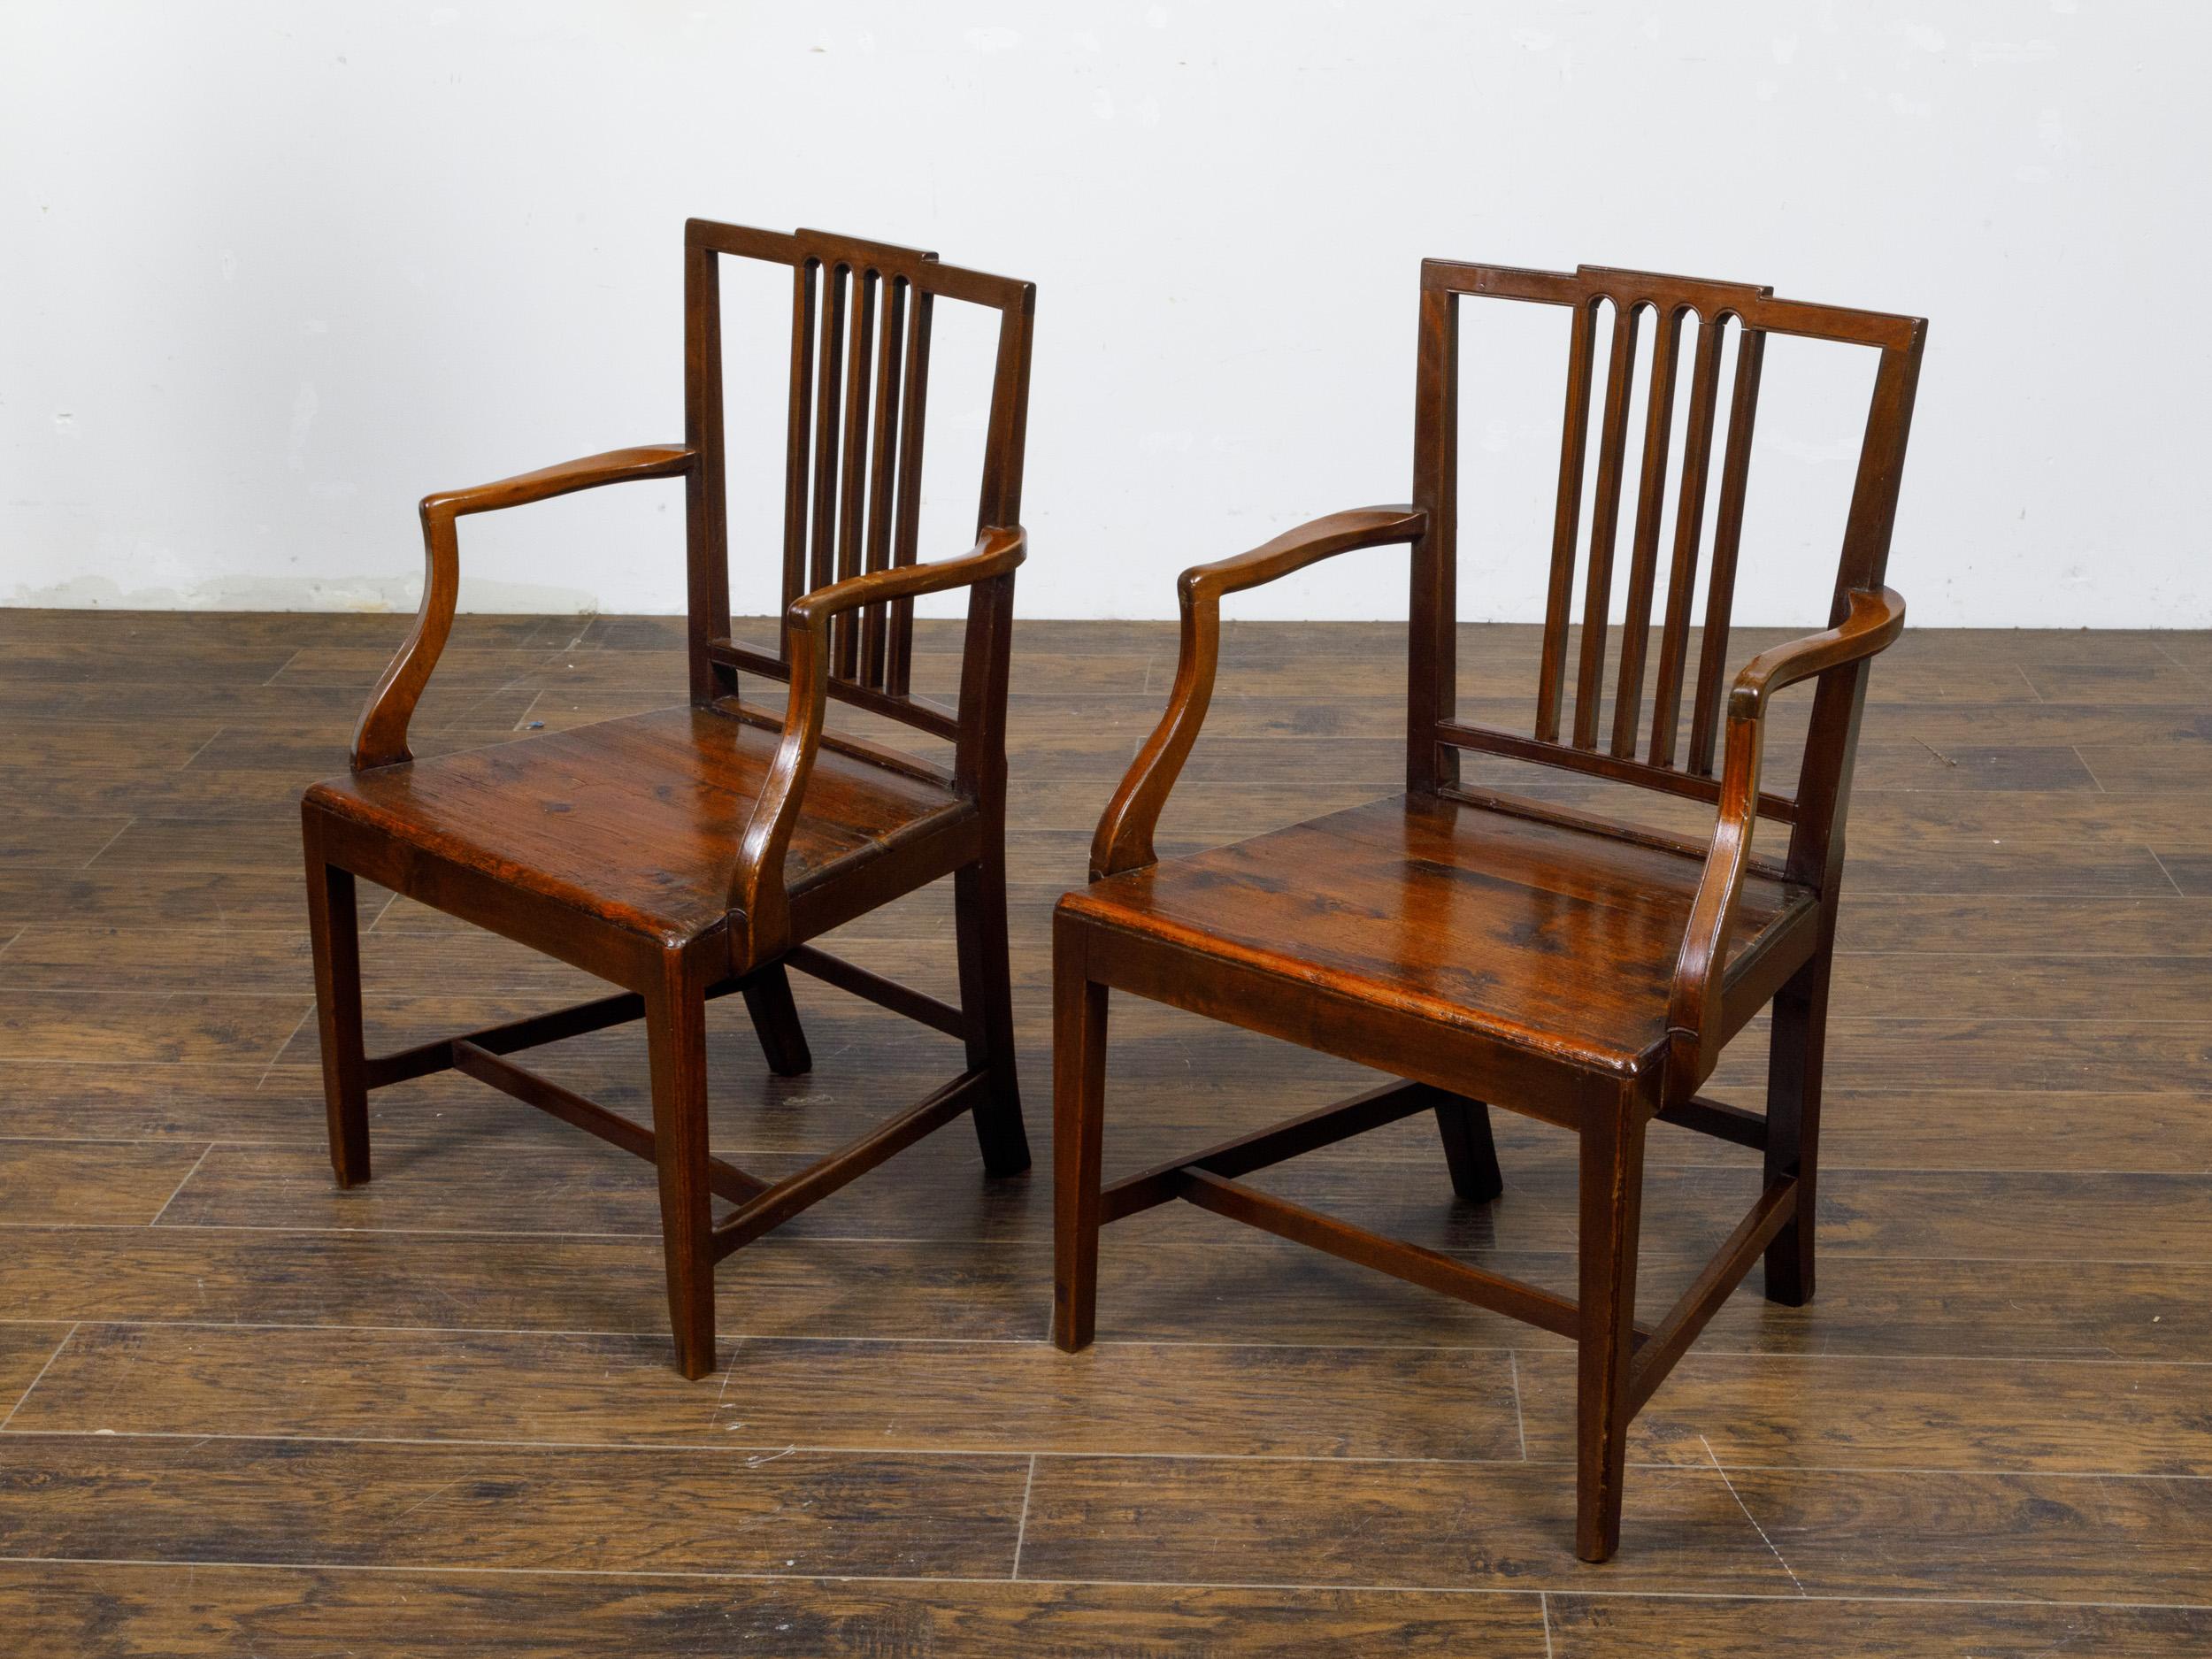 Wood Pair of English Early 19th Century Plank Seat Chairs with Scrolling Arms For Sale